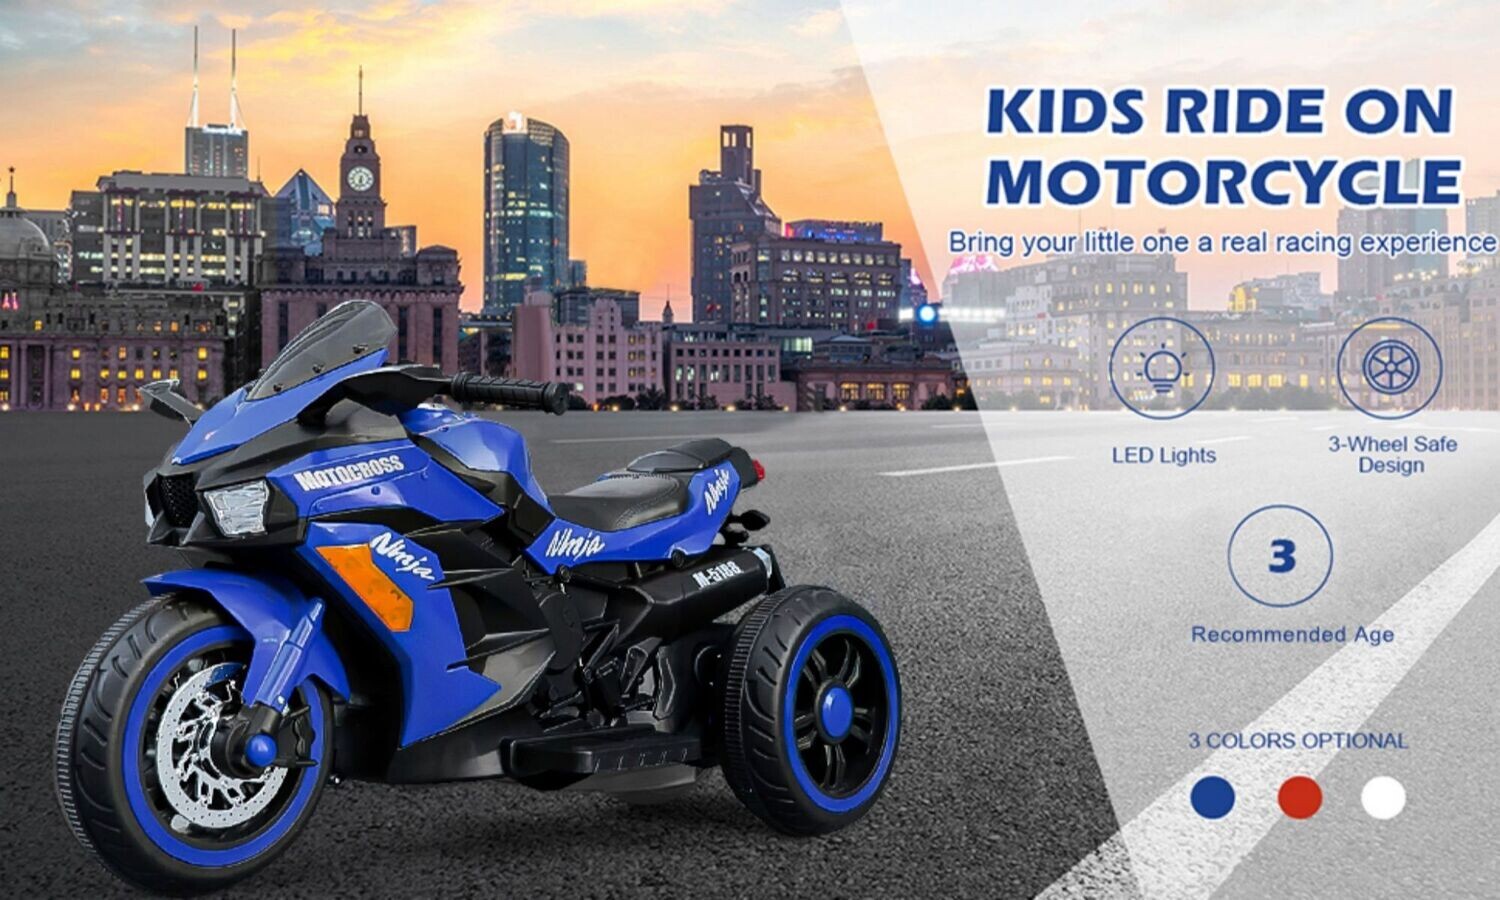 12V Battery Motorcycle, 3 Wheel Motorcycle, Kids Rechargeable Riding Electric Car - Blue, Options: Blue+50 - 99 Lbs+3 to 4 Years+ABS+PC+Indoor & Outdoor Use